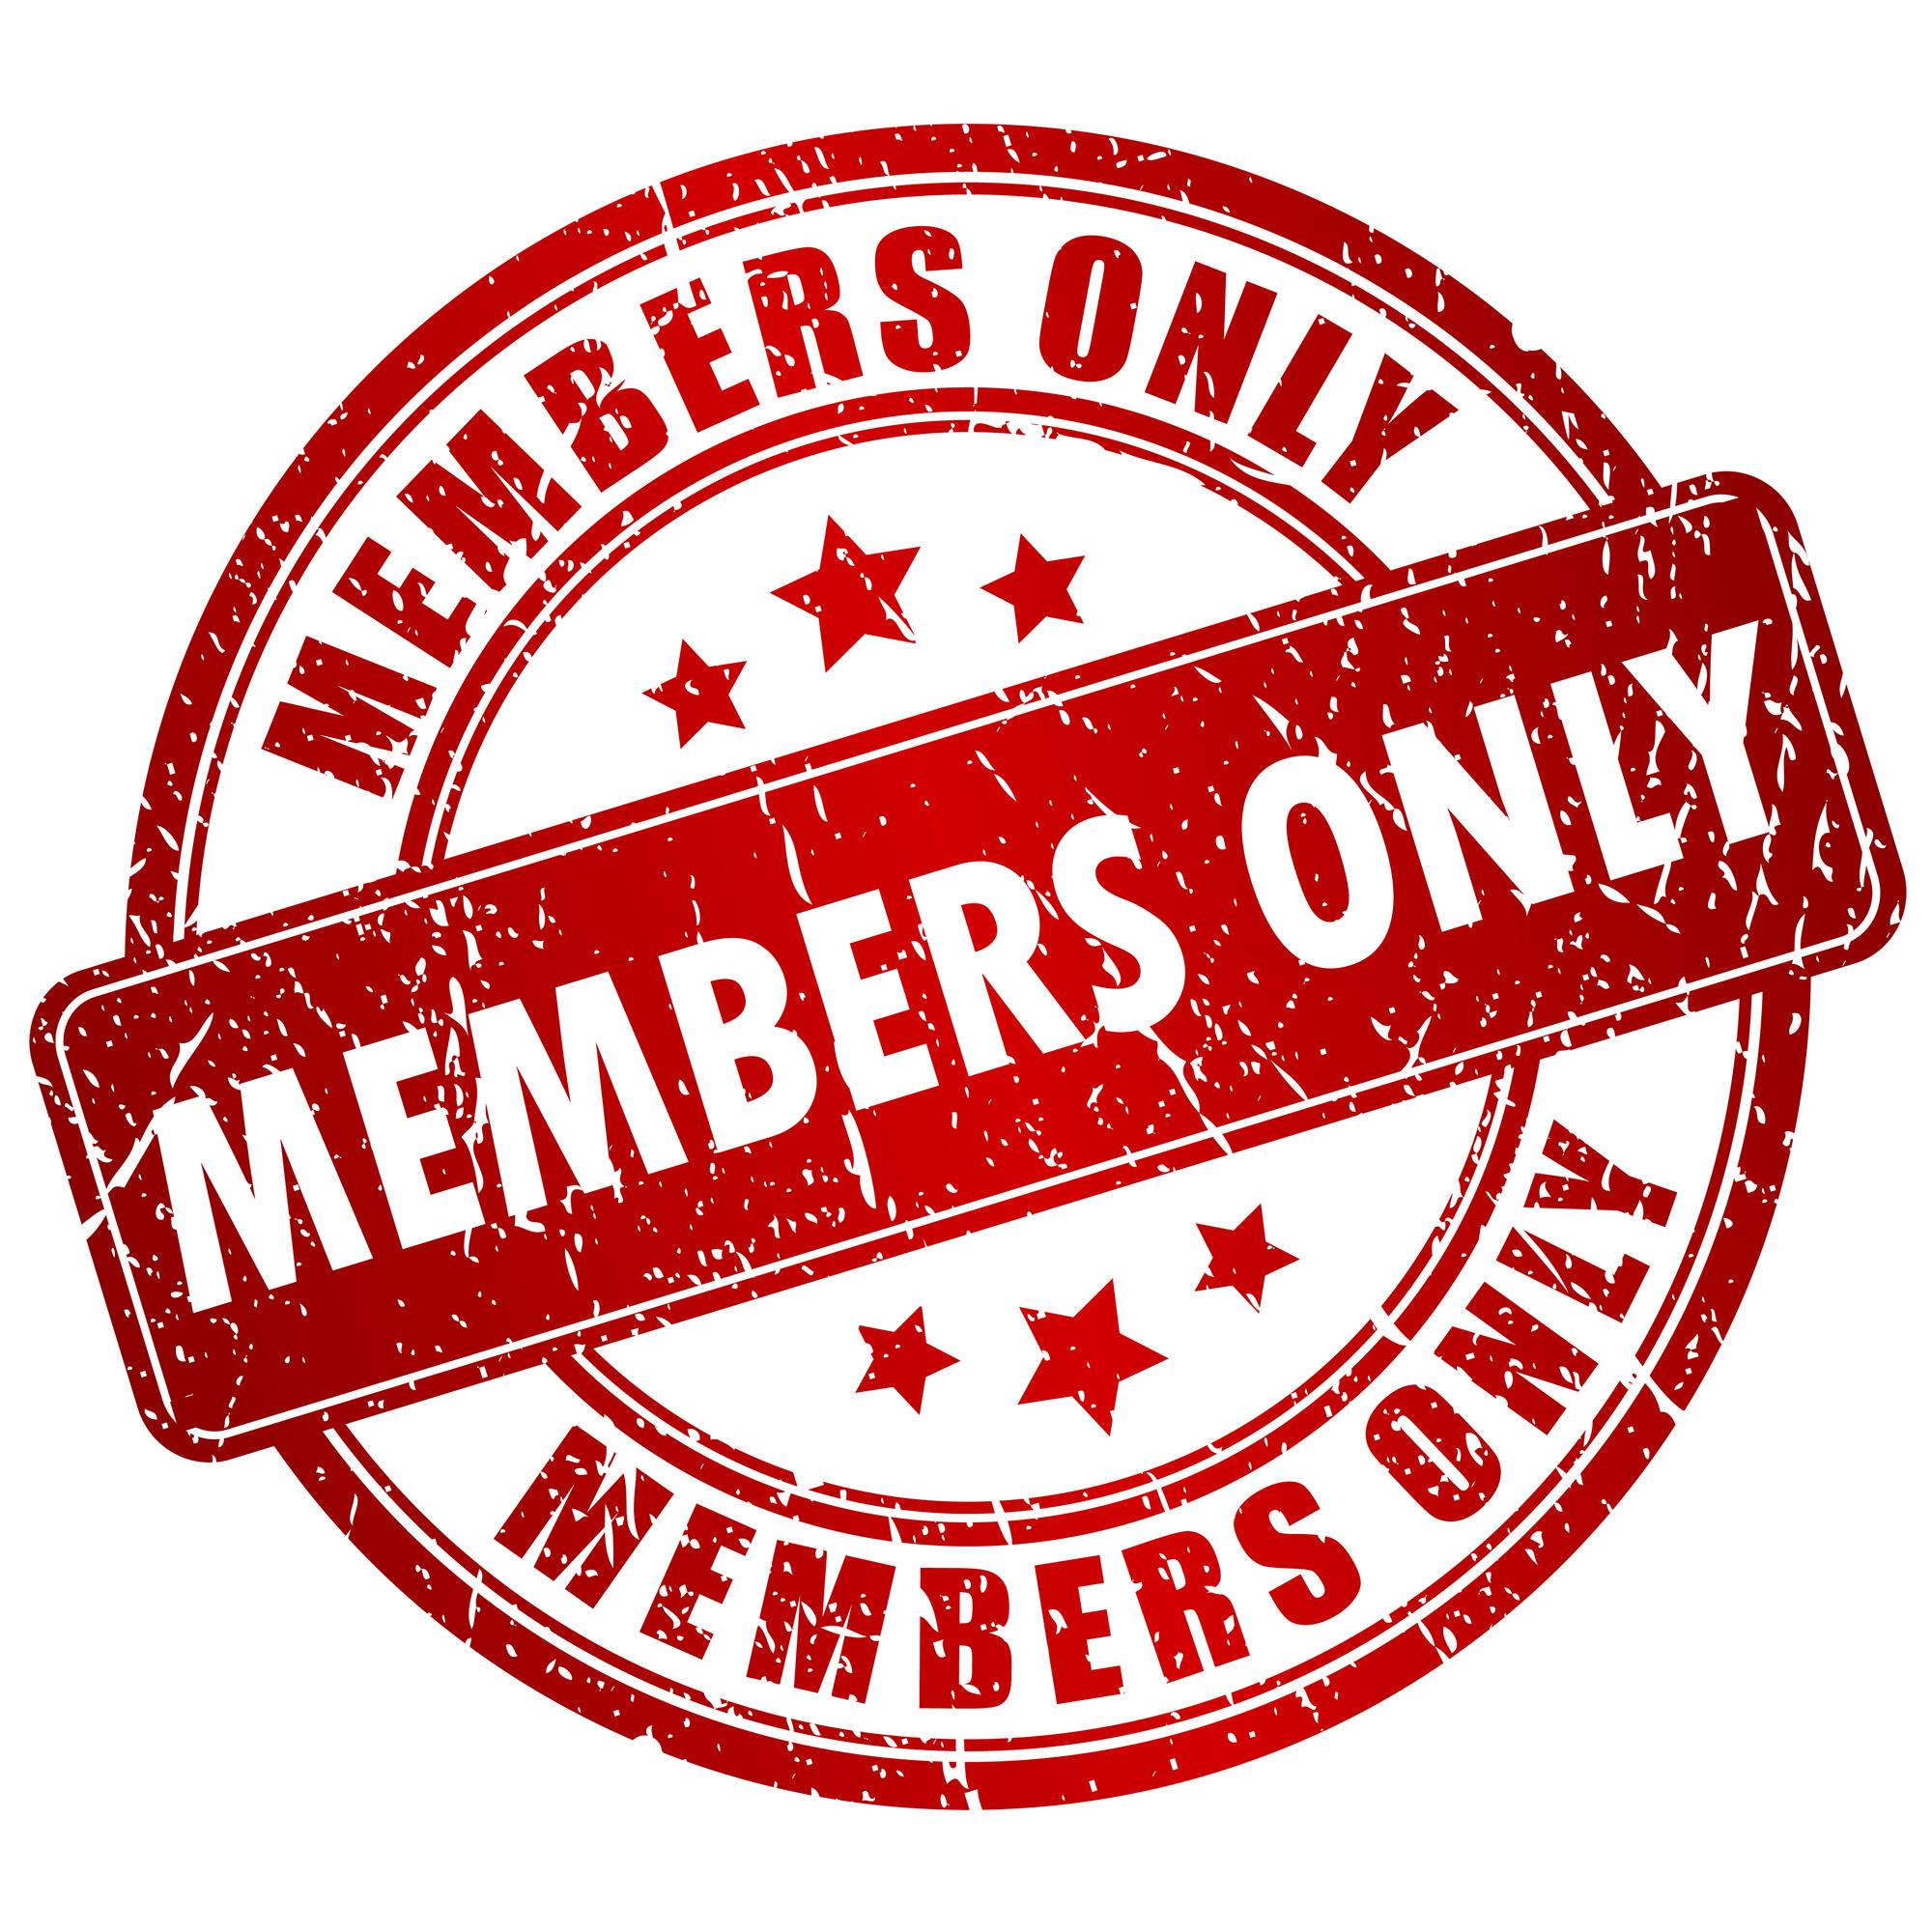 5 Great Reasons to Start a Membership Site